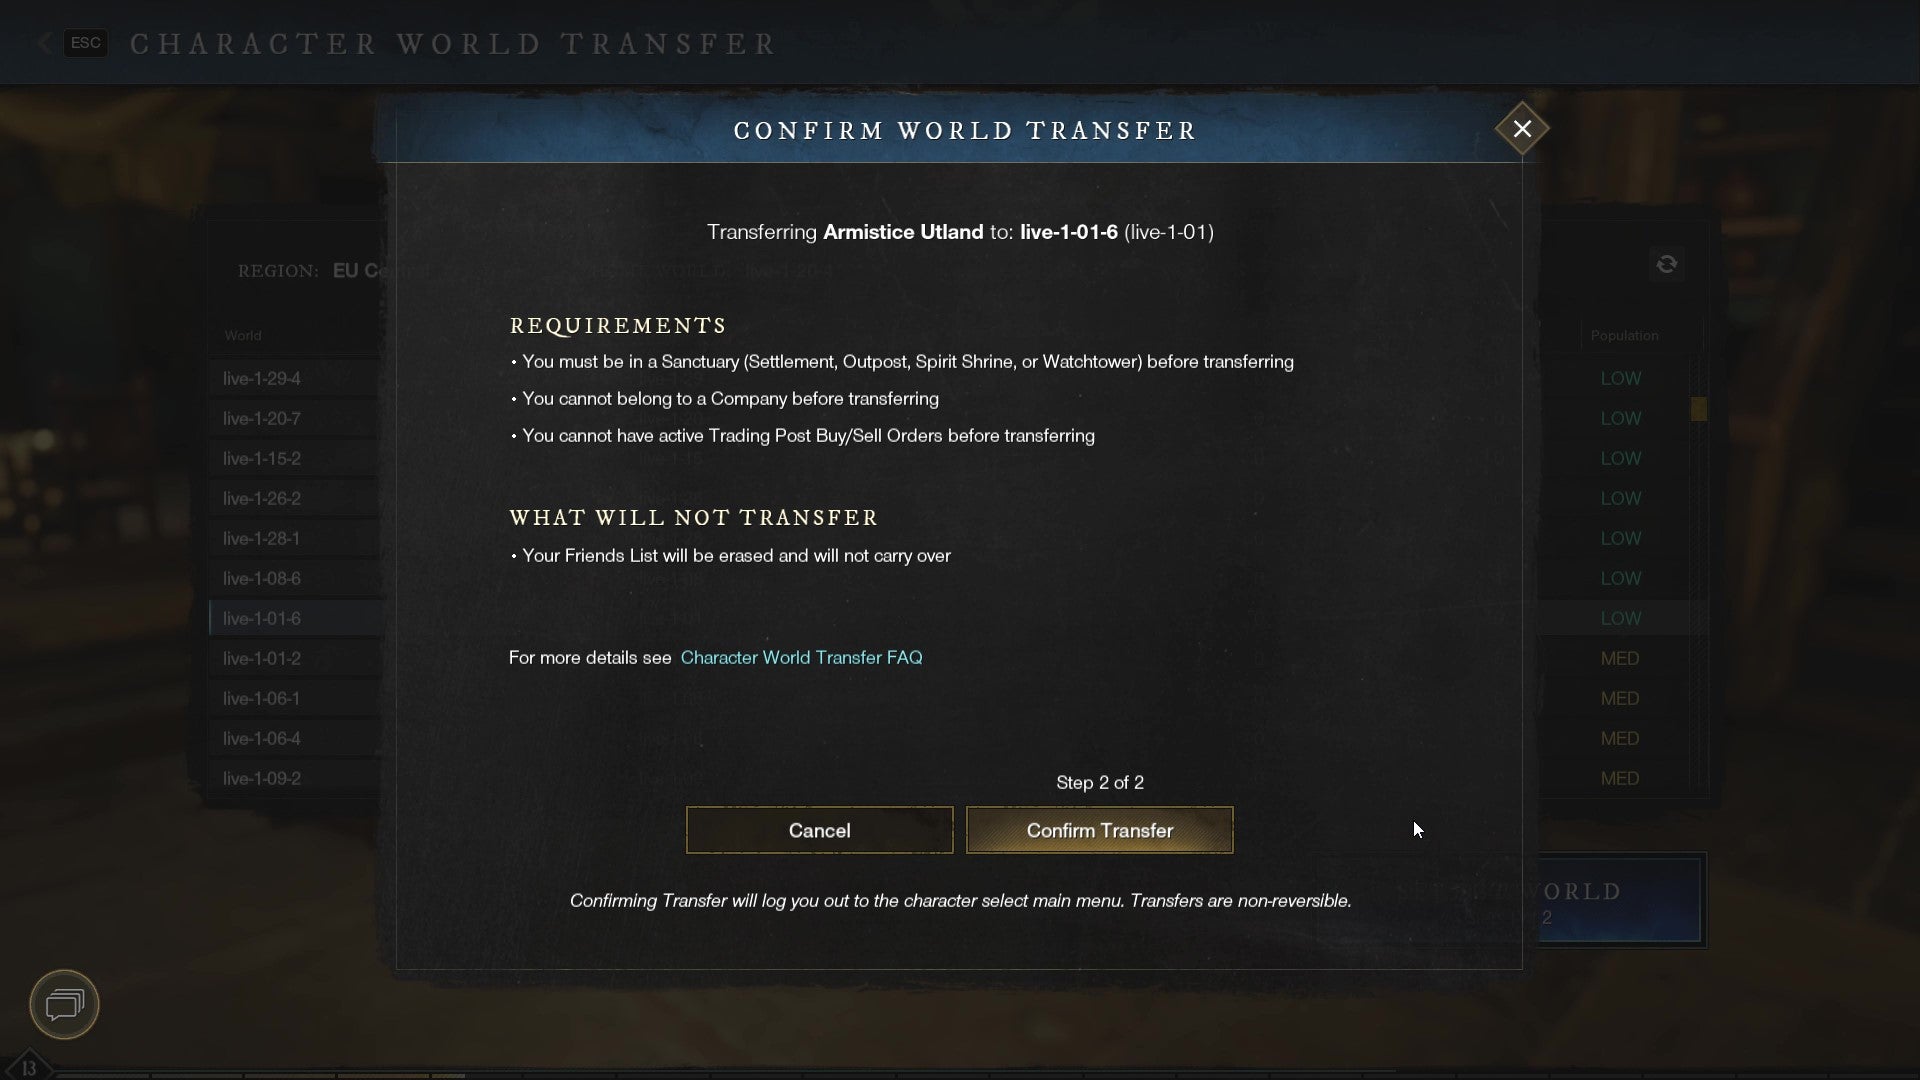 The New World character transfer page, requesting confirmation before the transfer is locked in.